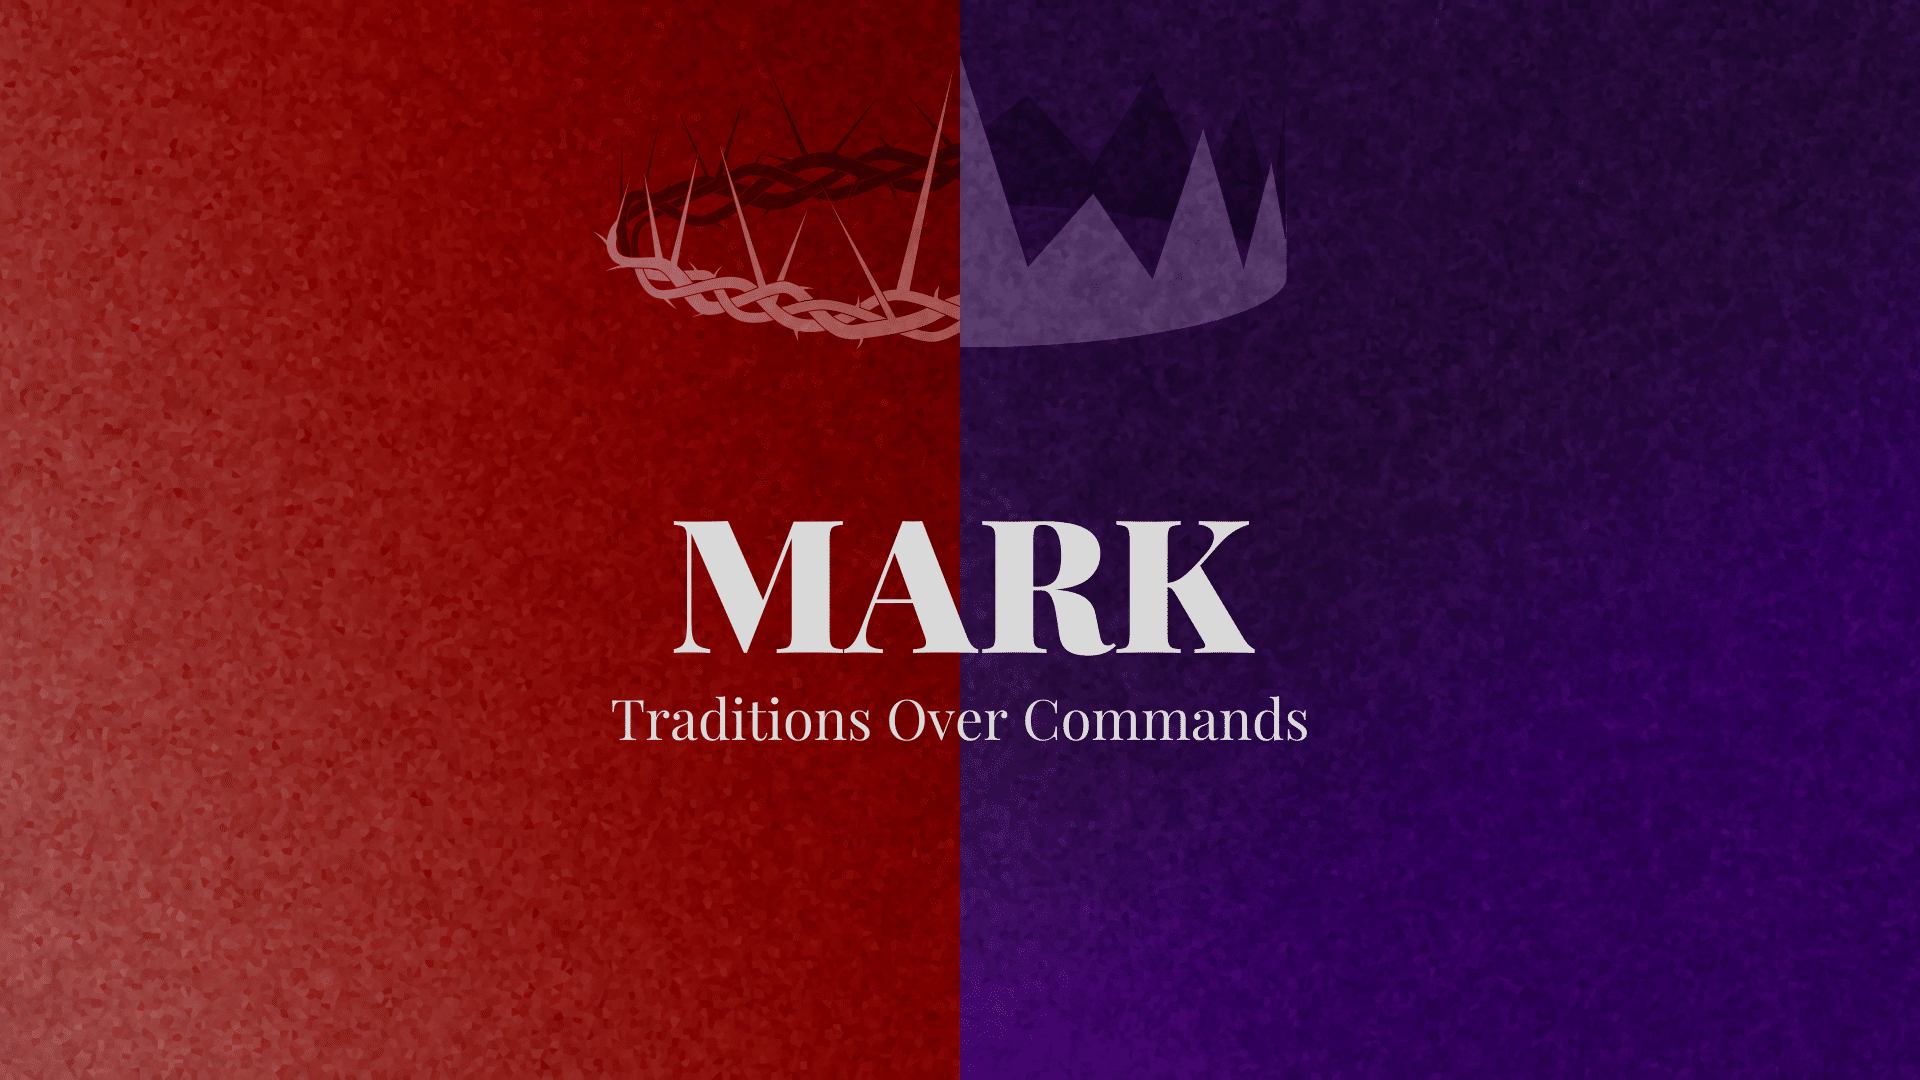 Mark: Traditions Over Commands